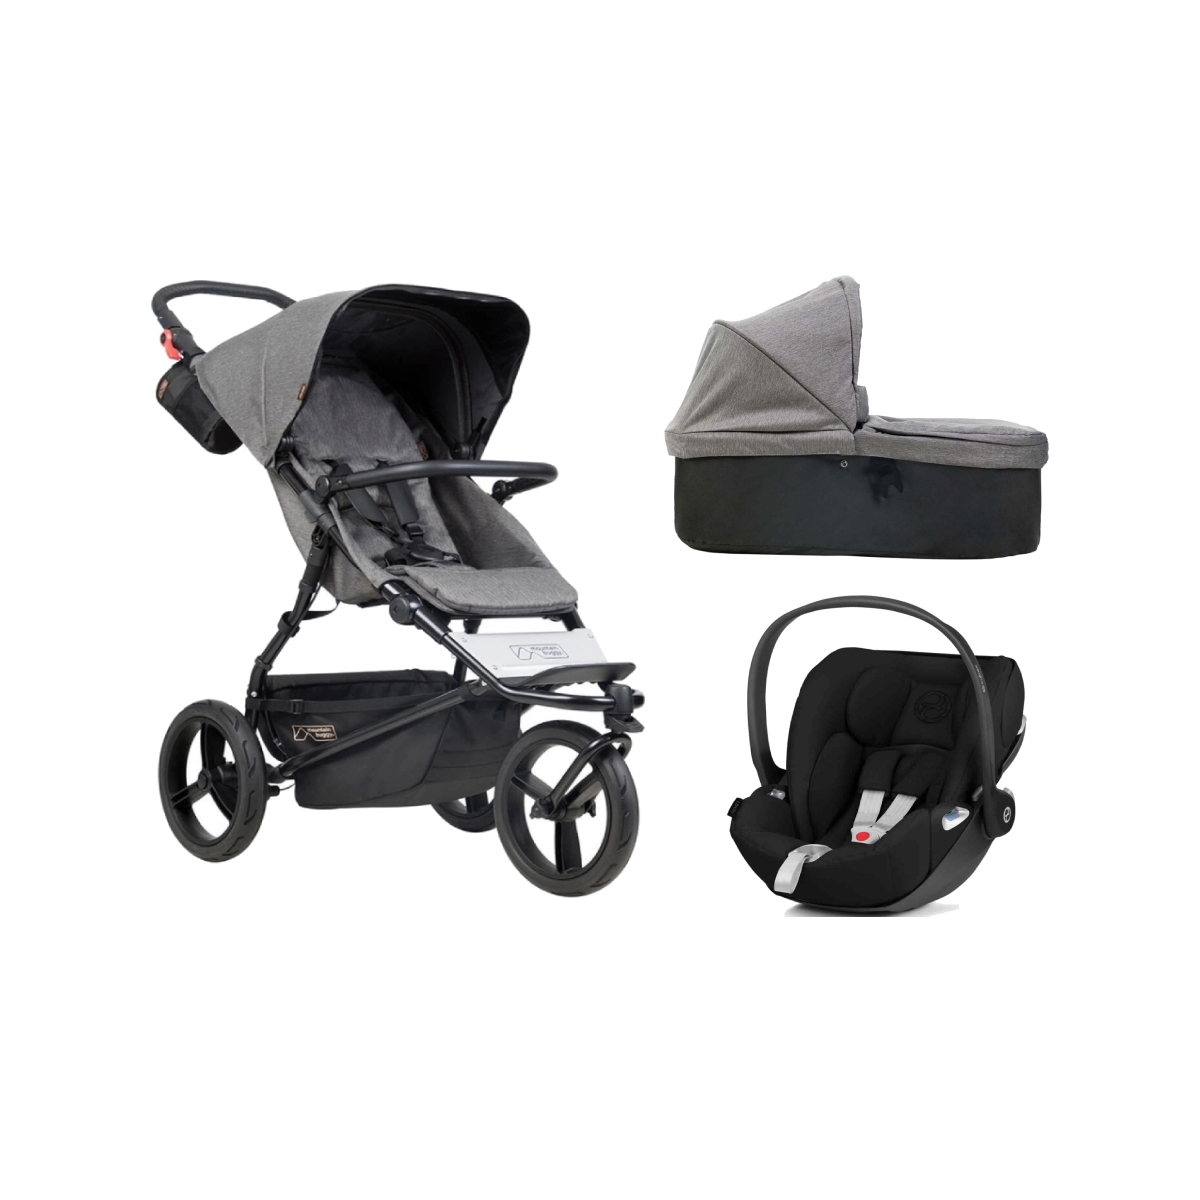 Mountain Buggy Urban Jungle Luxury Cloud Z Travel System